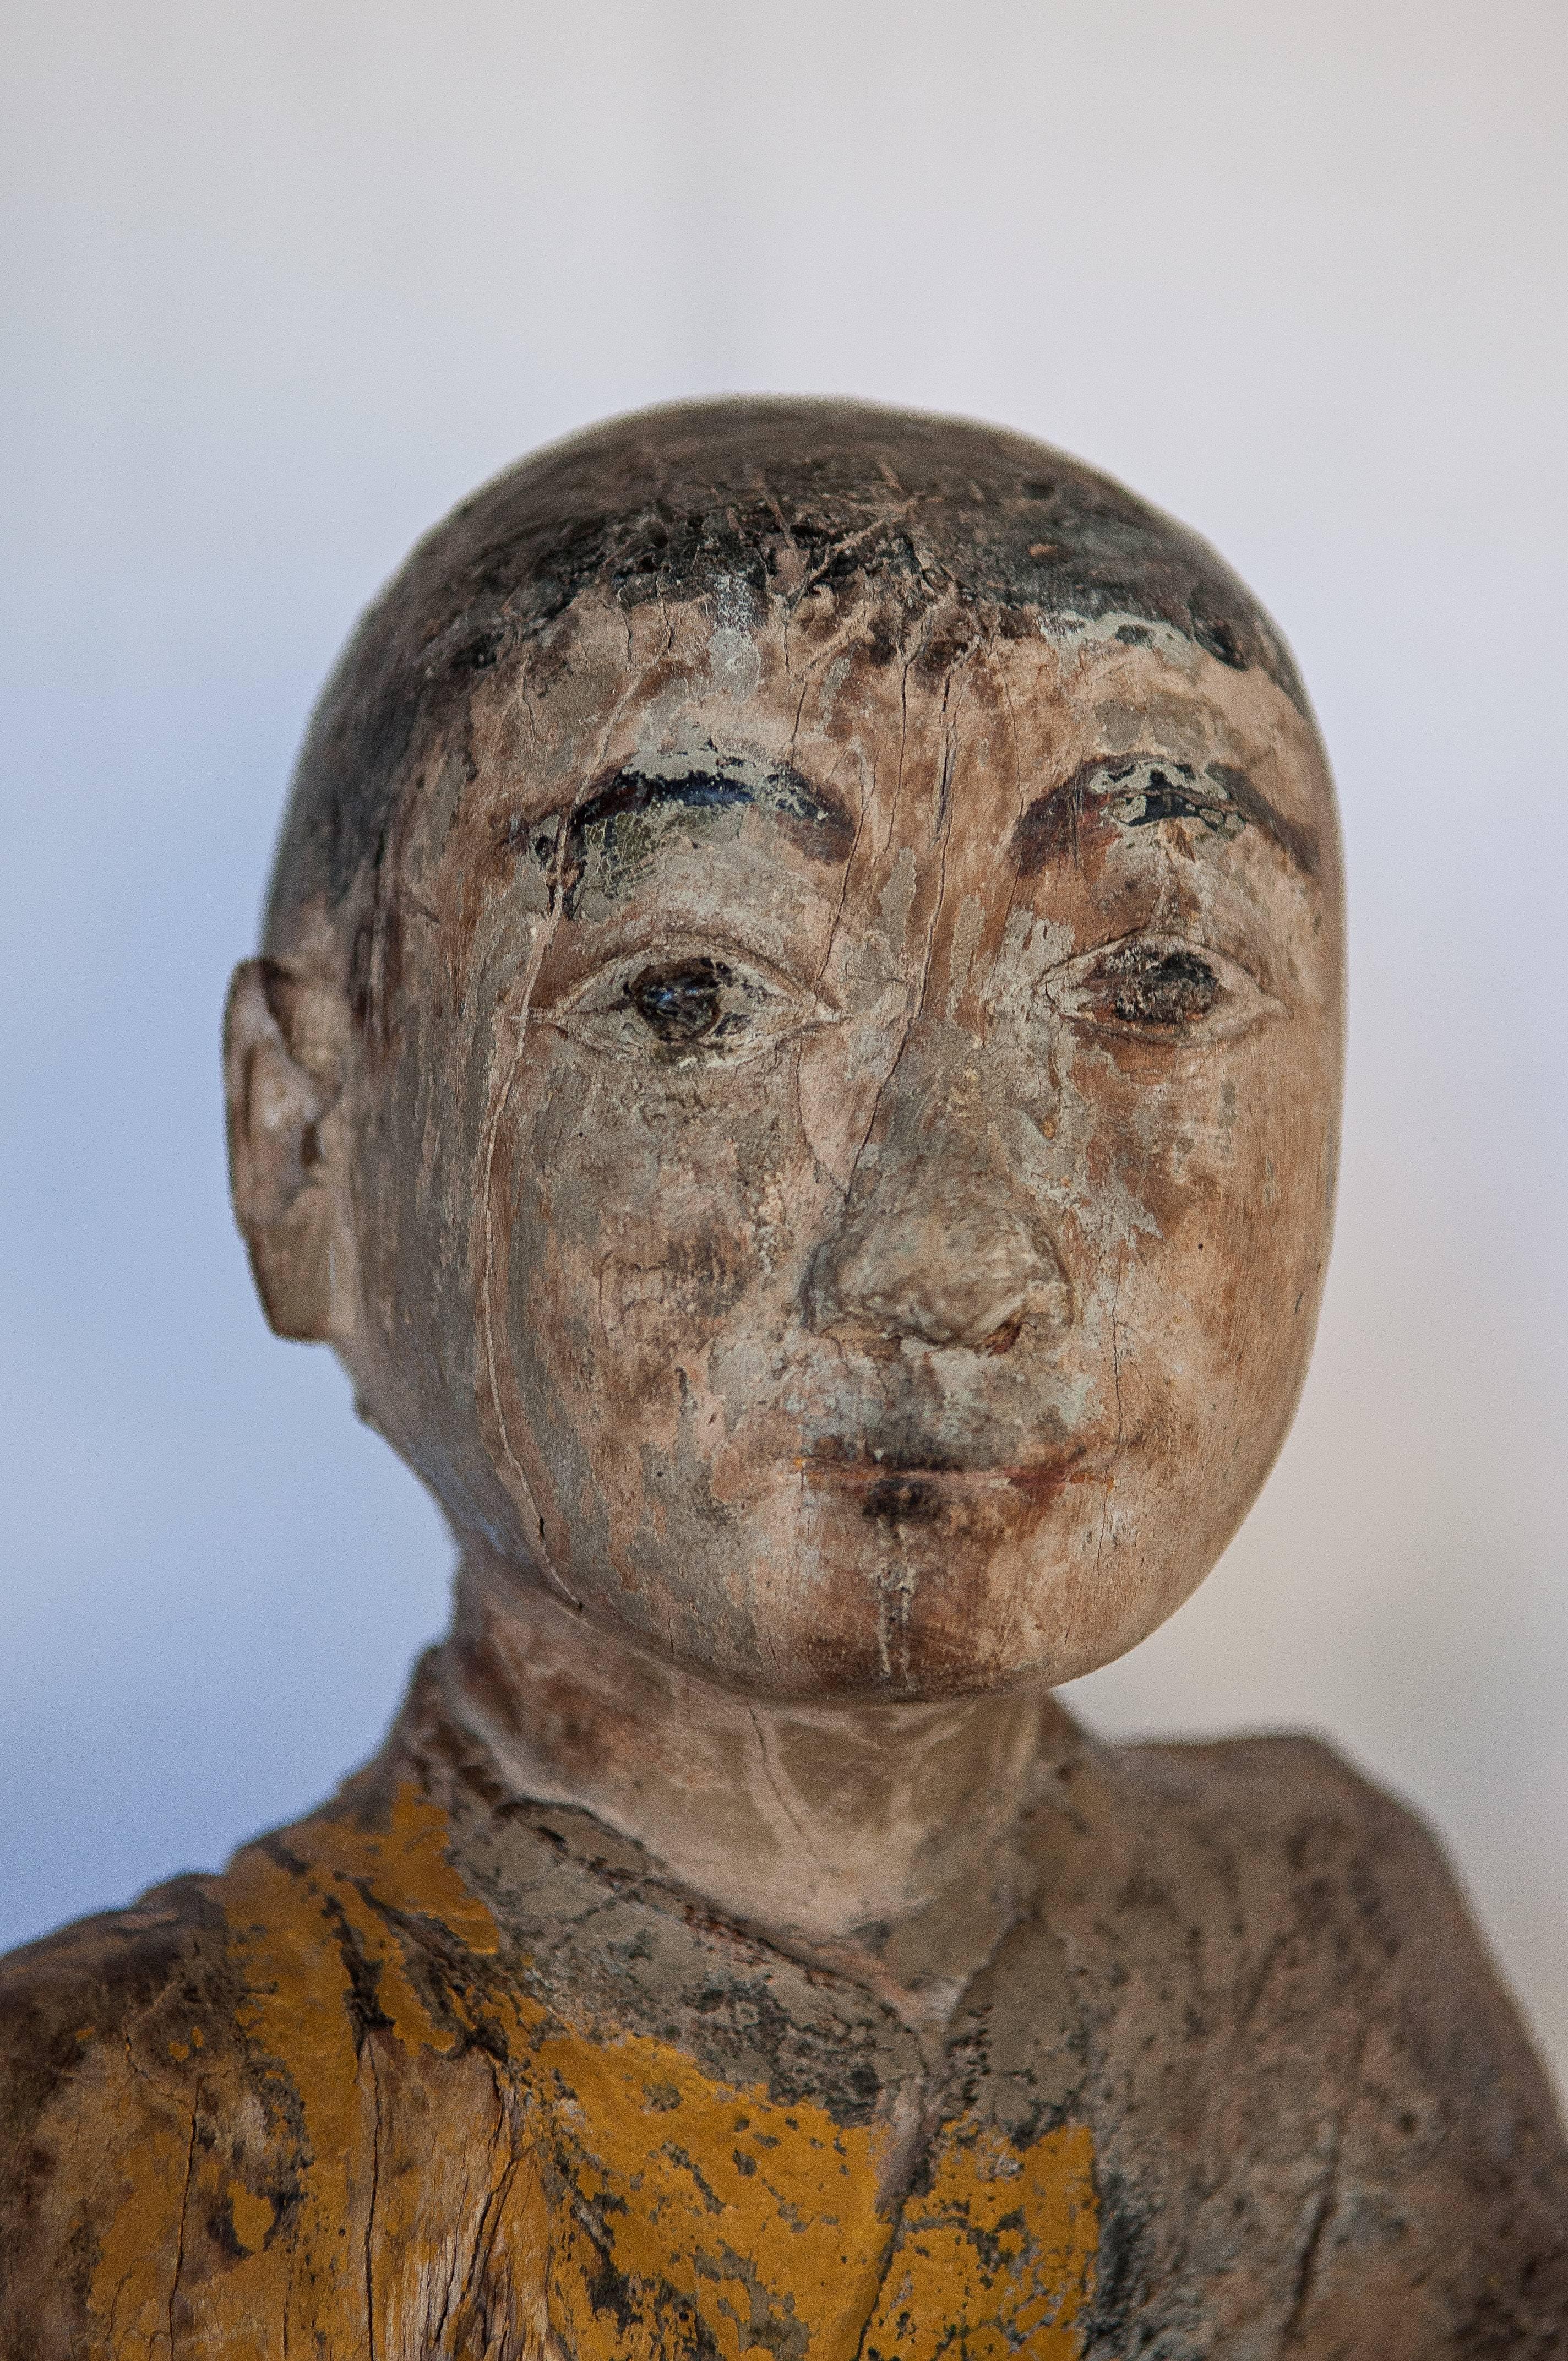 Burmese Buddhist wood carving. Sitting monk or teacher, early 20th century.
This simple yet wonderfully expressive carved figure from Burma was most likely placed in a village shrine or temple. Long years of exposure have eroded the underside of the